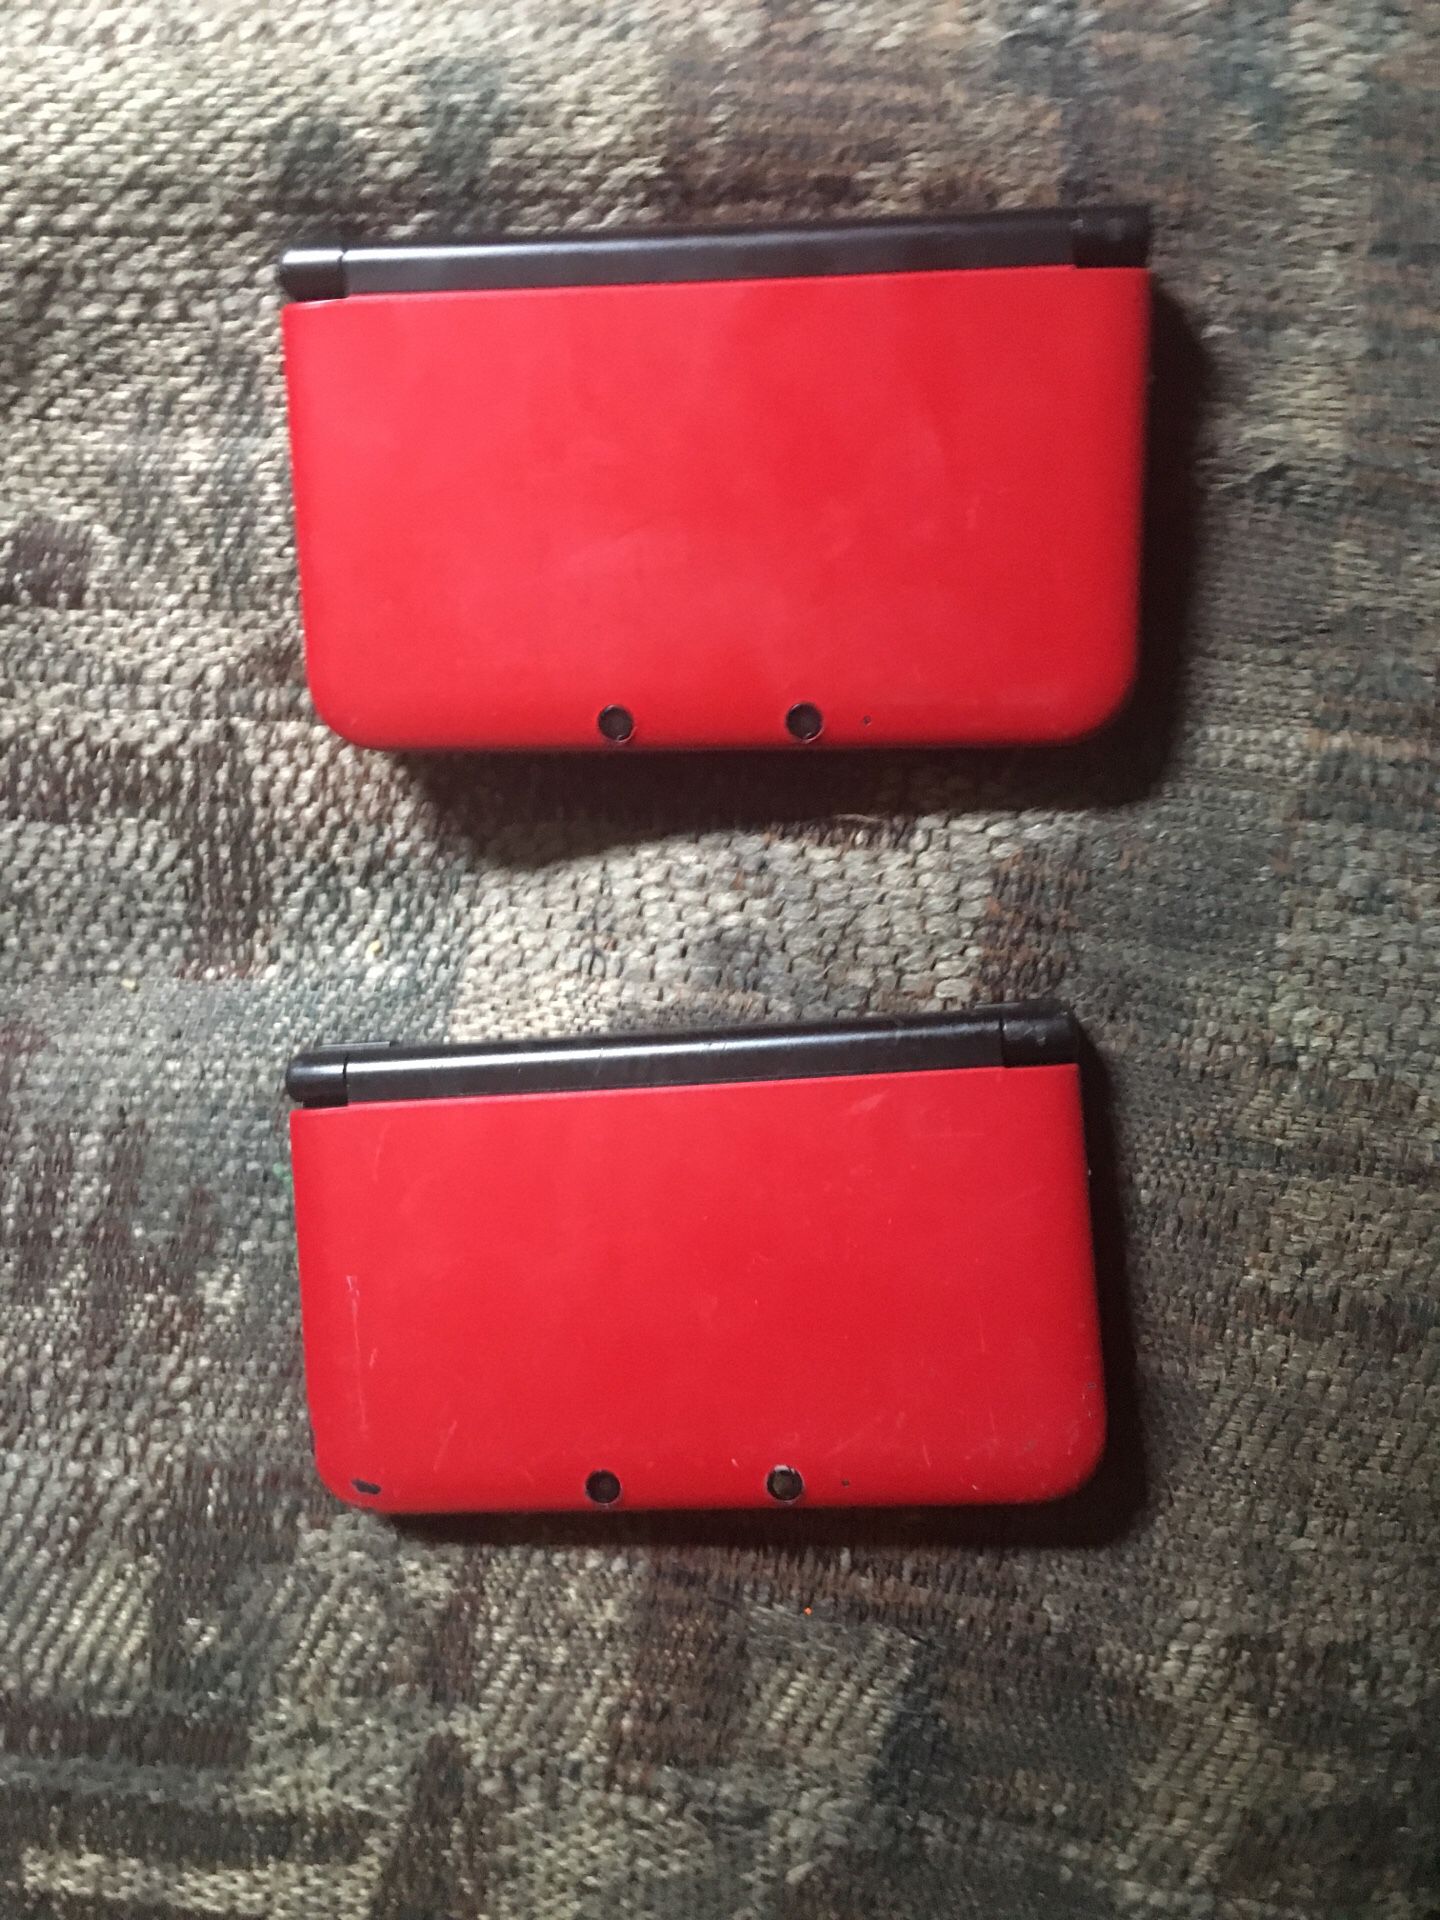 2 red Nintendo 3ds xl